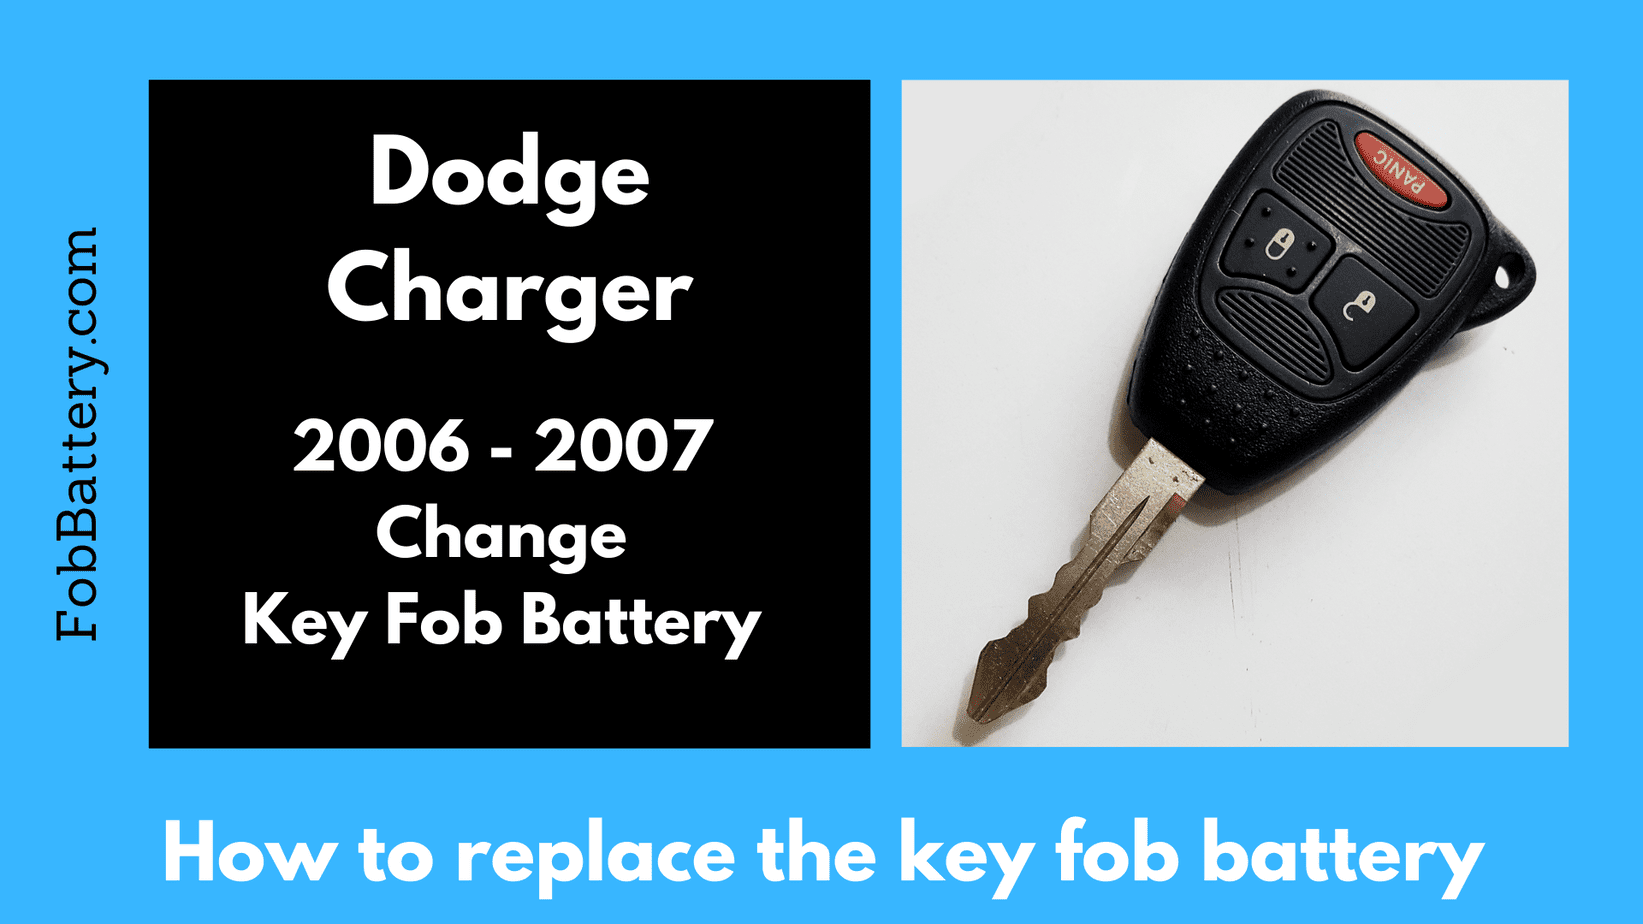 Dodge charger key fob battery replacement.